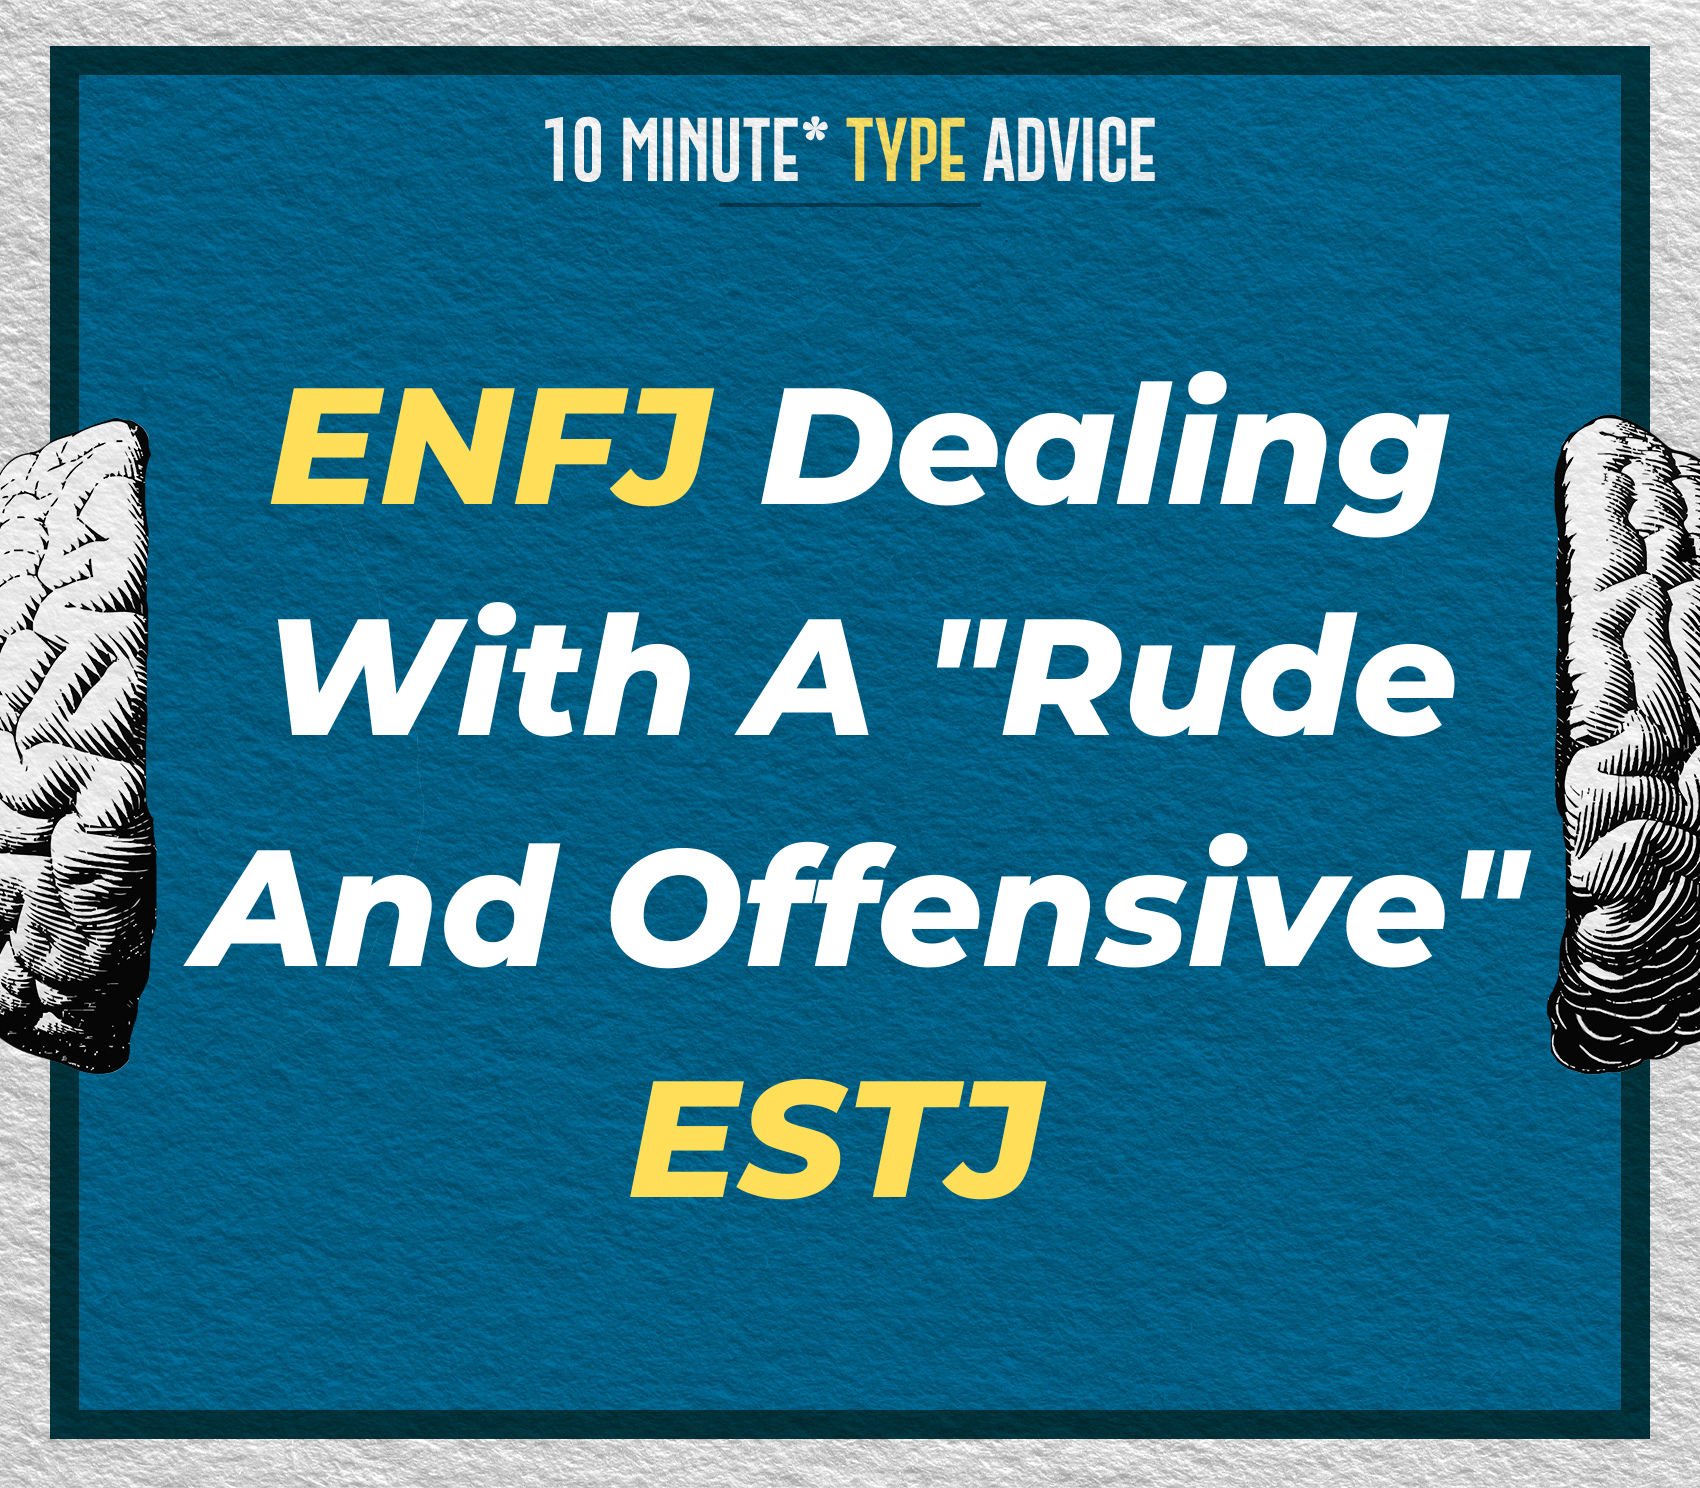 ENFJ Dealing With A "Rude And Offensive" ESTJ | 10 Min Type Advice | S01:E11